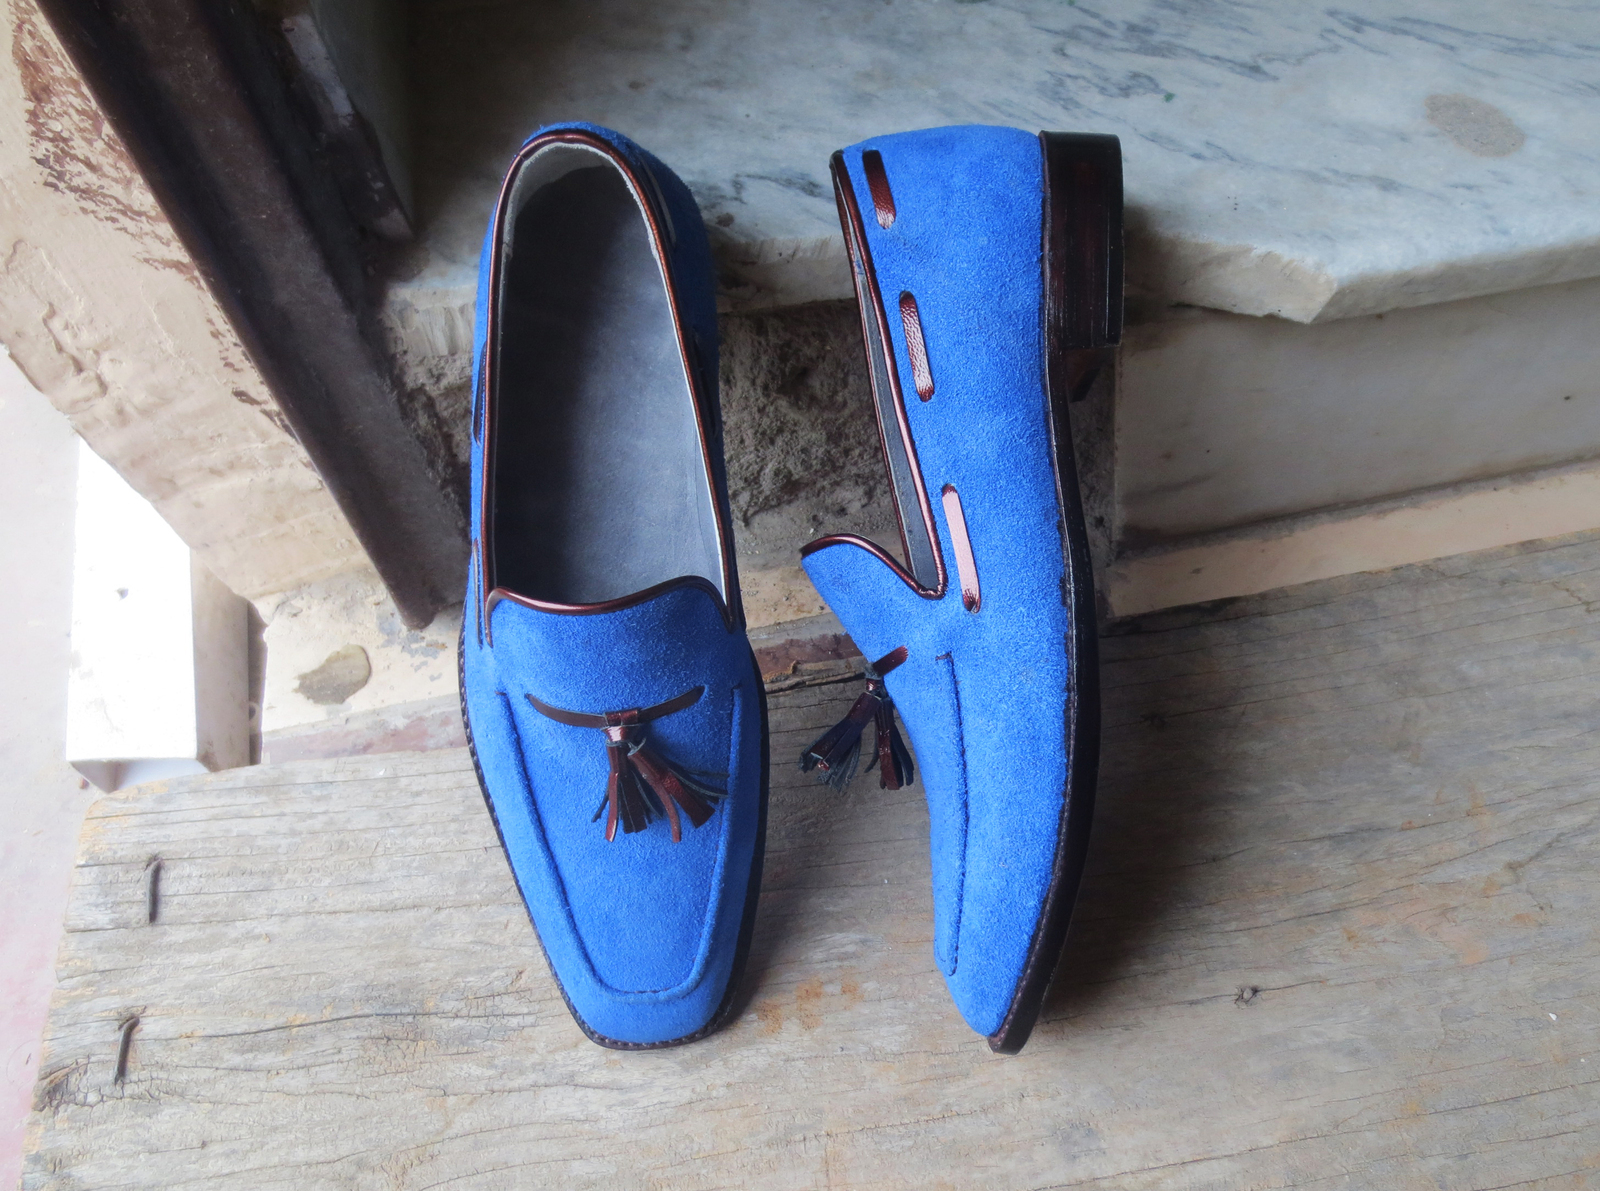 Men's Stylish Handmade Suede Leather Blue Shoes Loafer Party Tussle Leather shoe